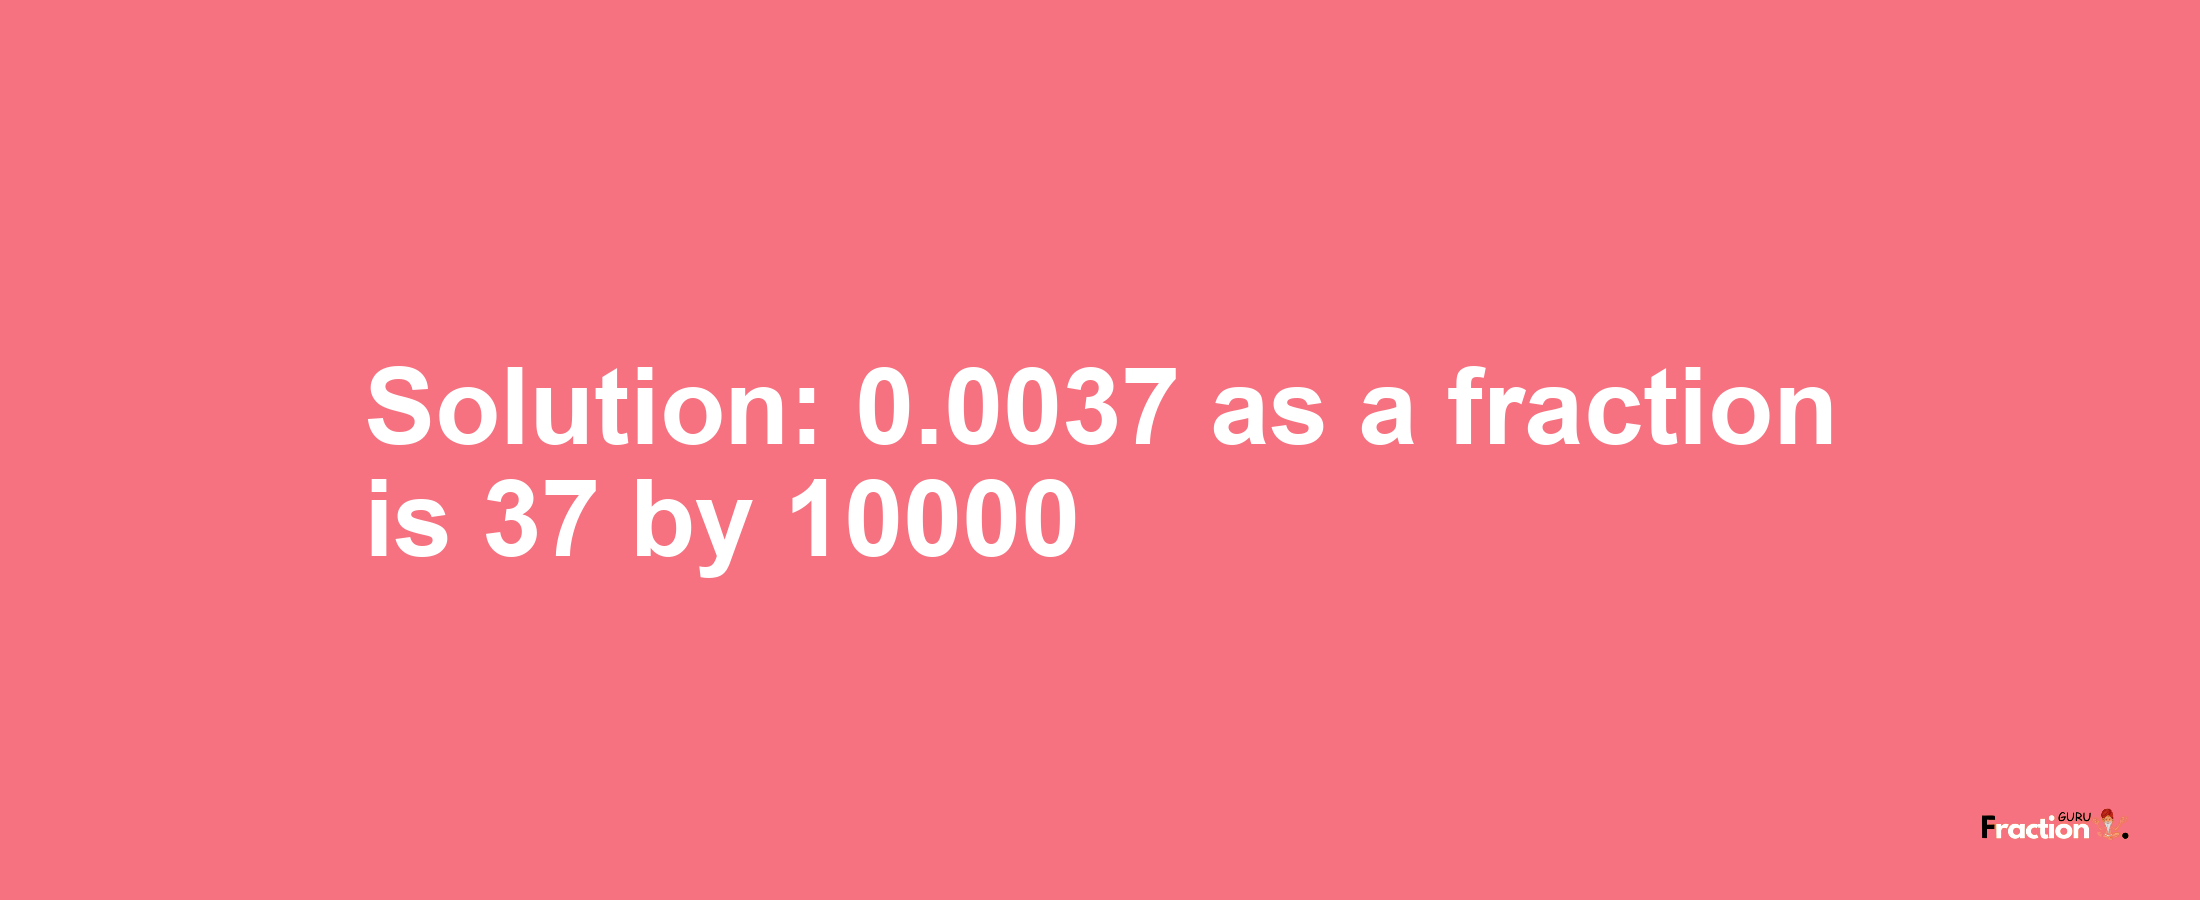 Solution:0.0037 as a fraction is 37/10000